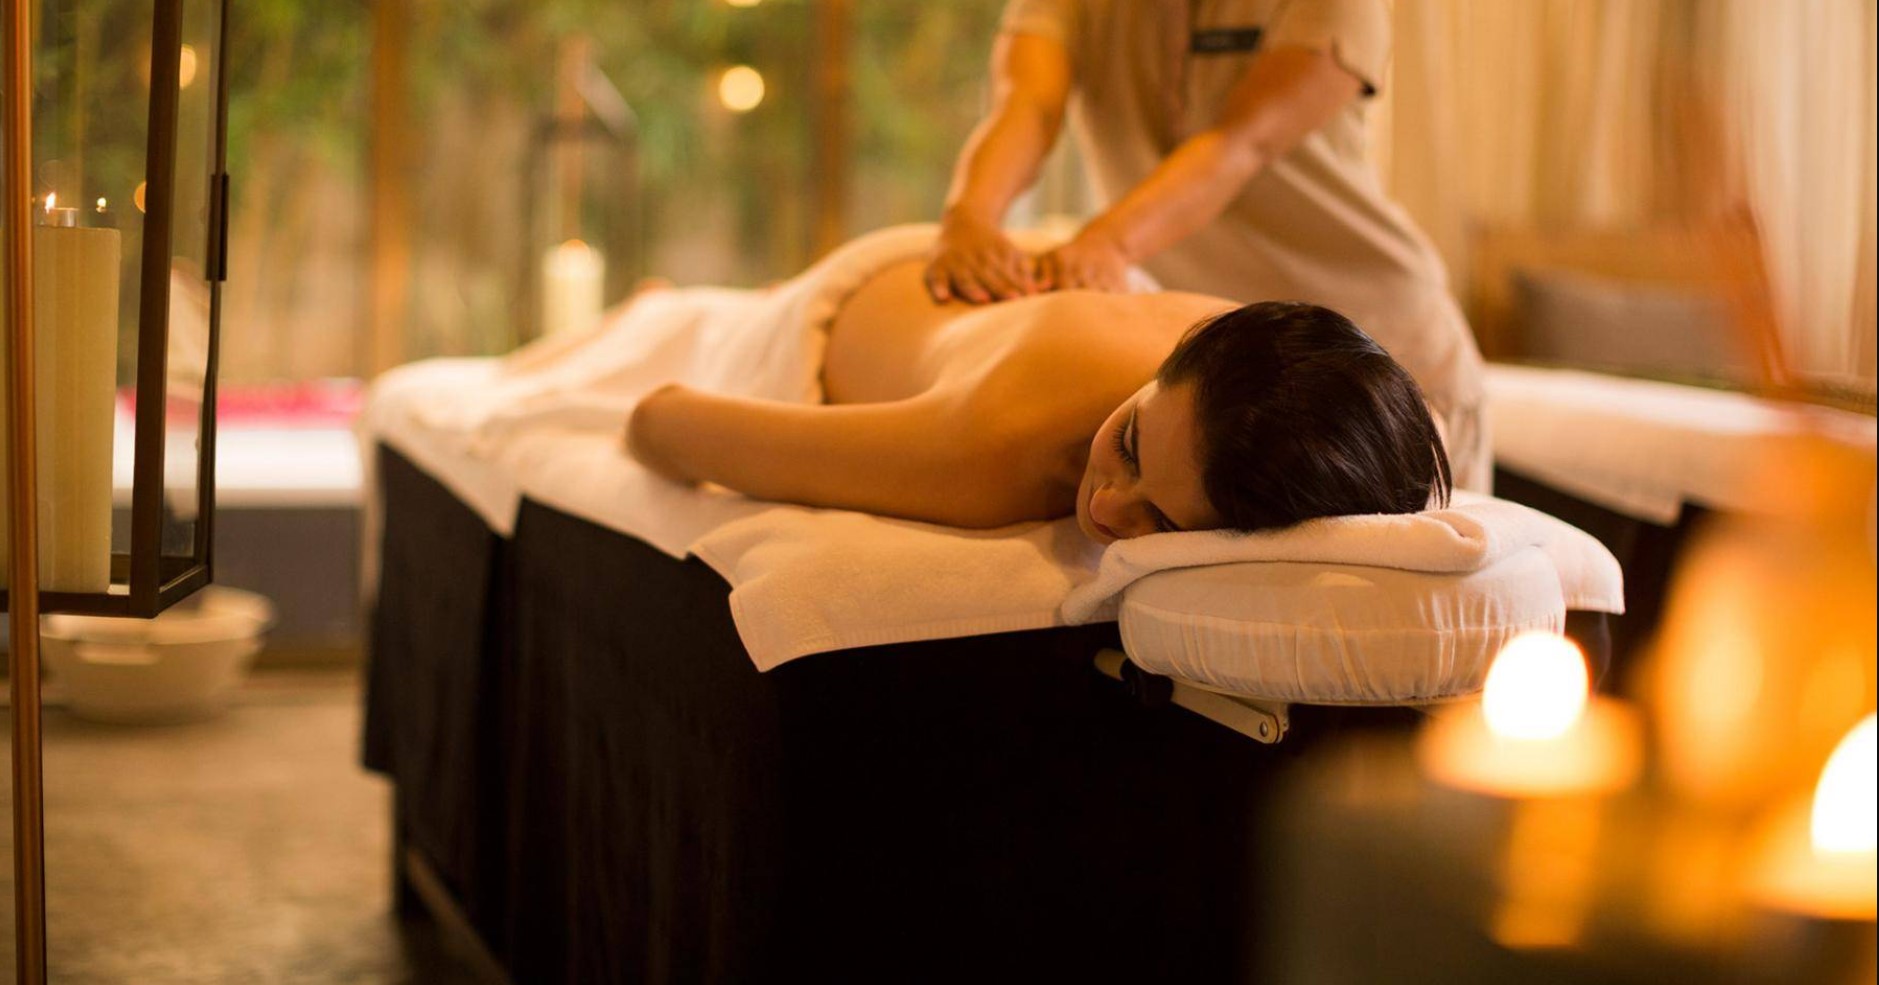 What Is Happy Ending Massage?